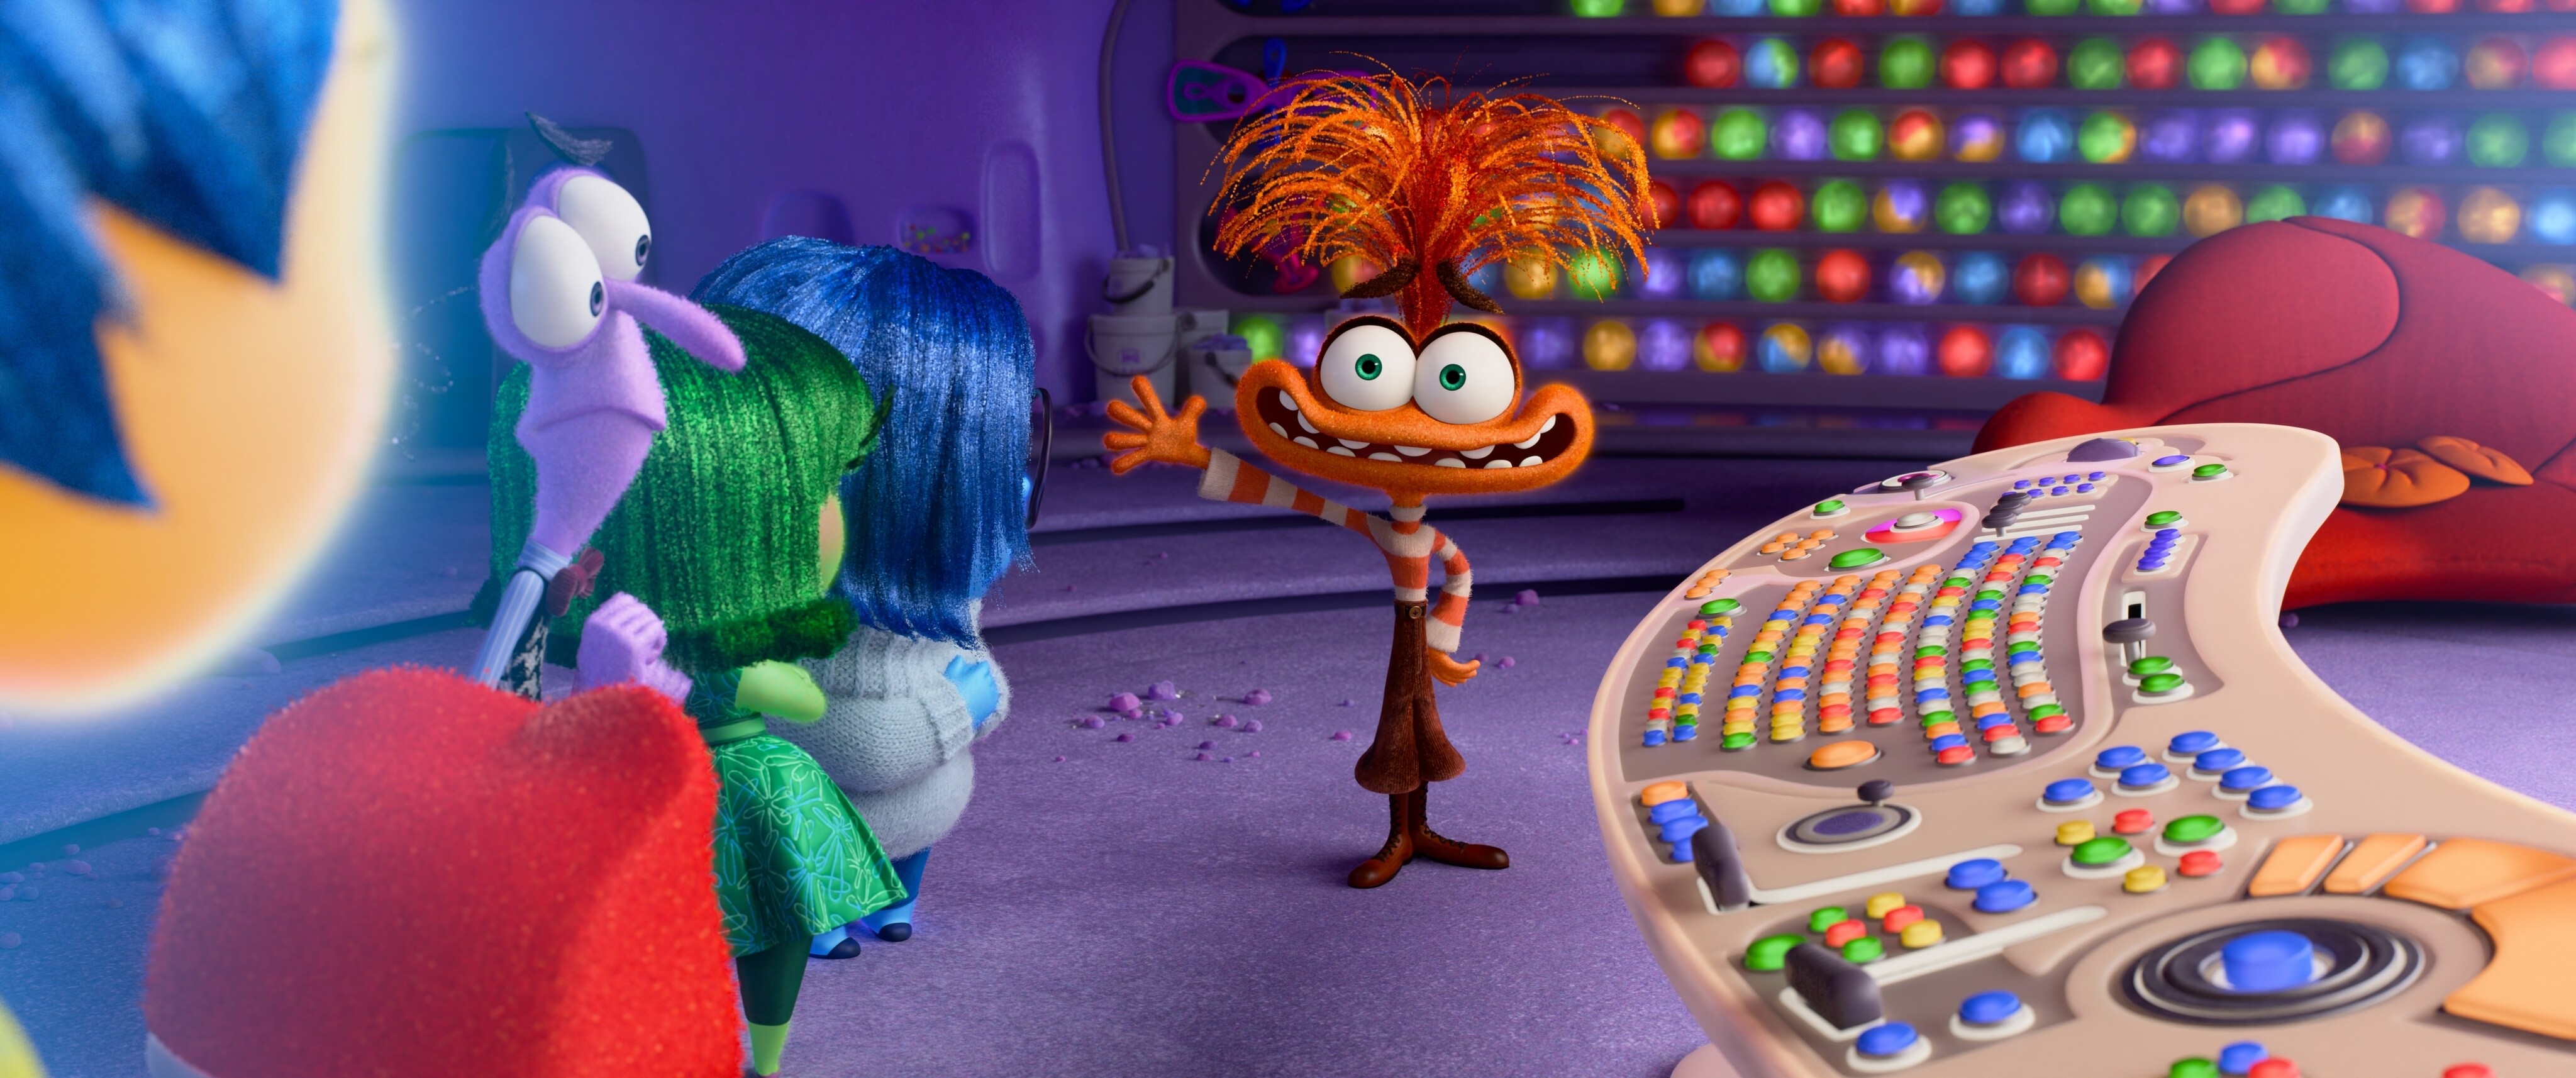 Inside Out 2 - Featured Content Banner - SG